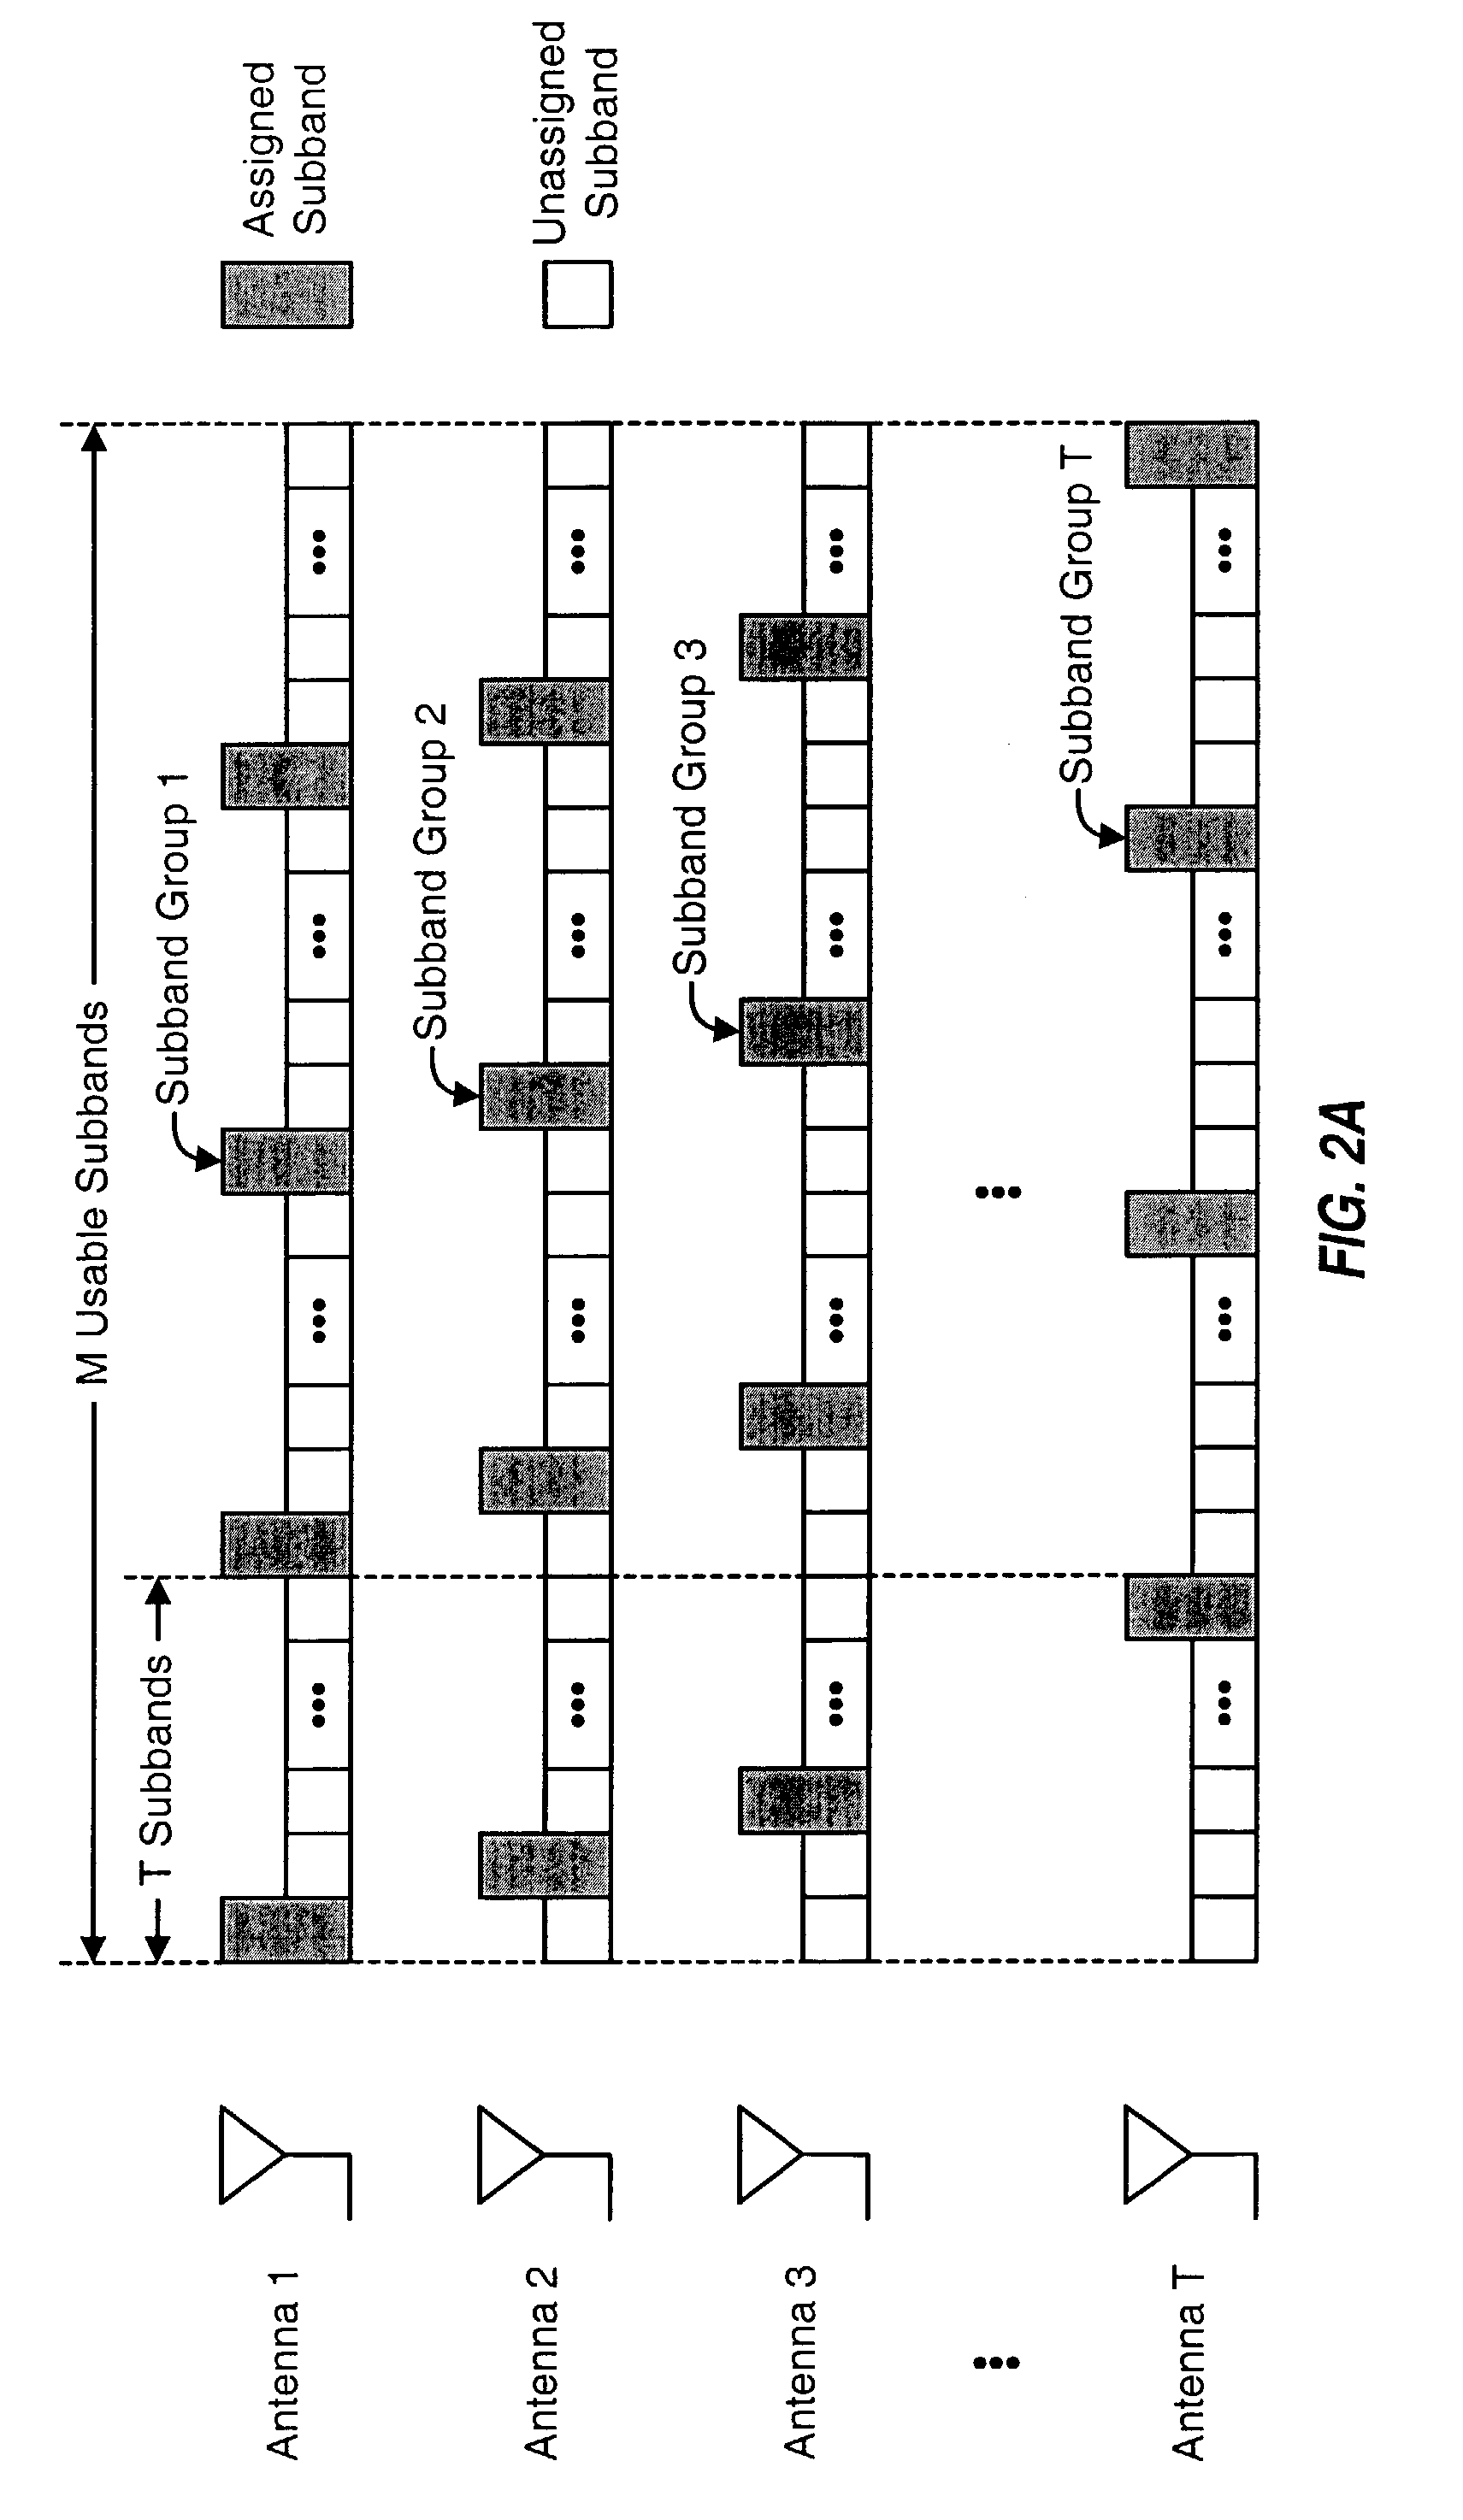 Transmission schemes for multi-antenna communication systems utilizing multi-carrier modulation